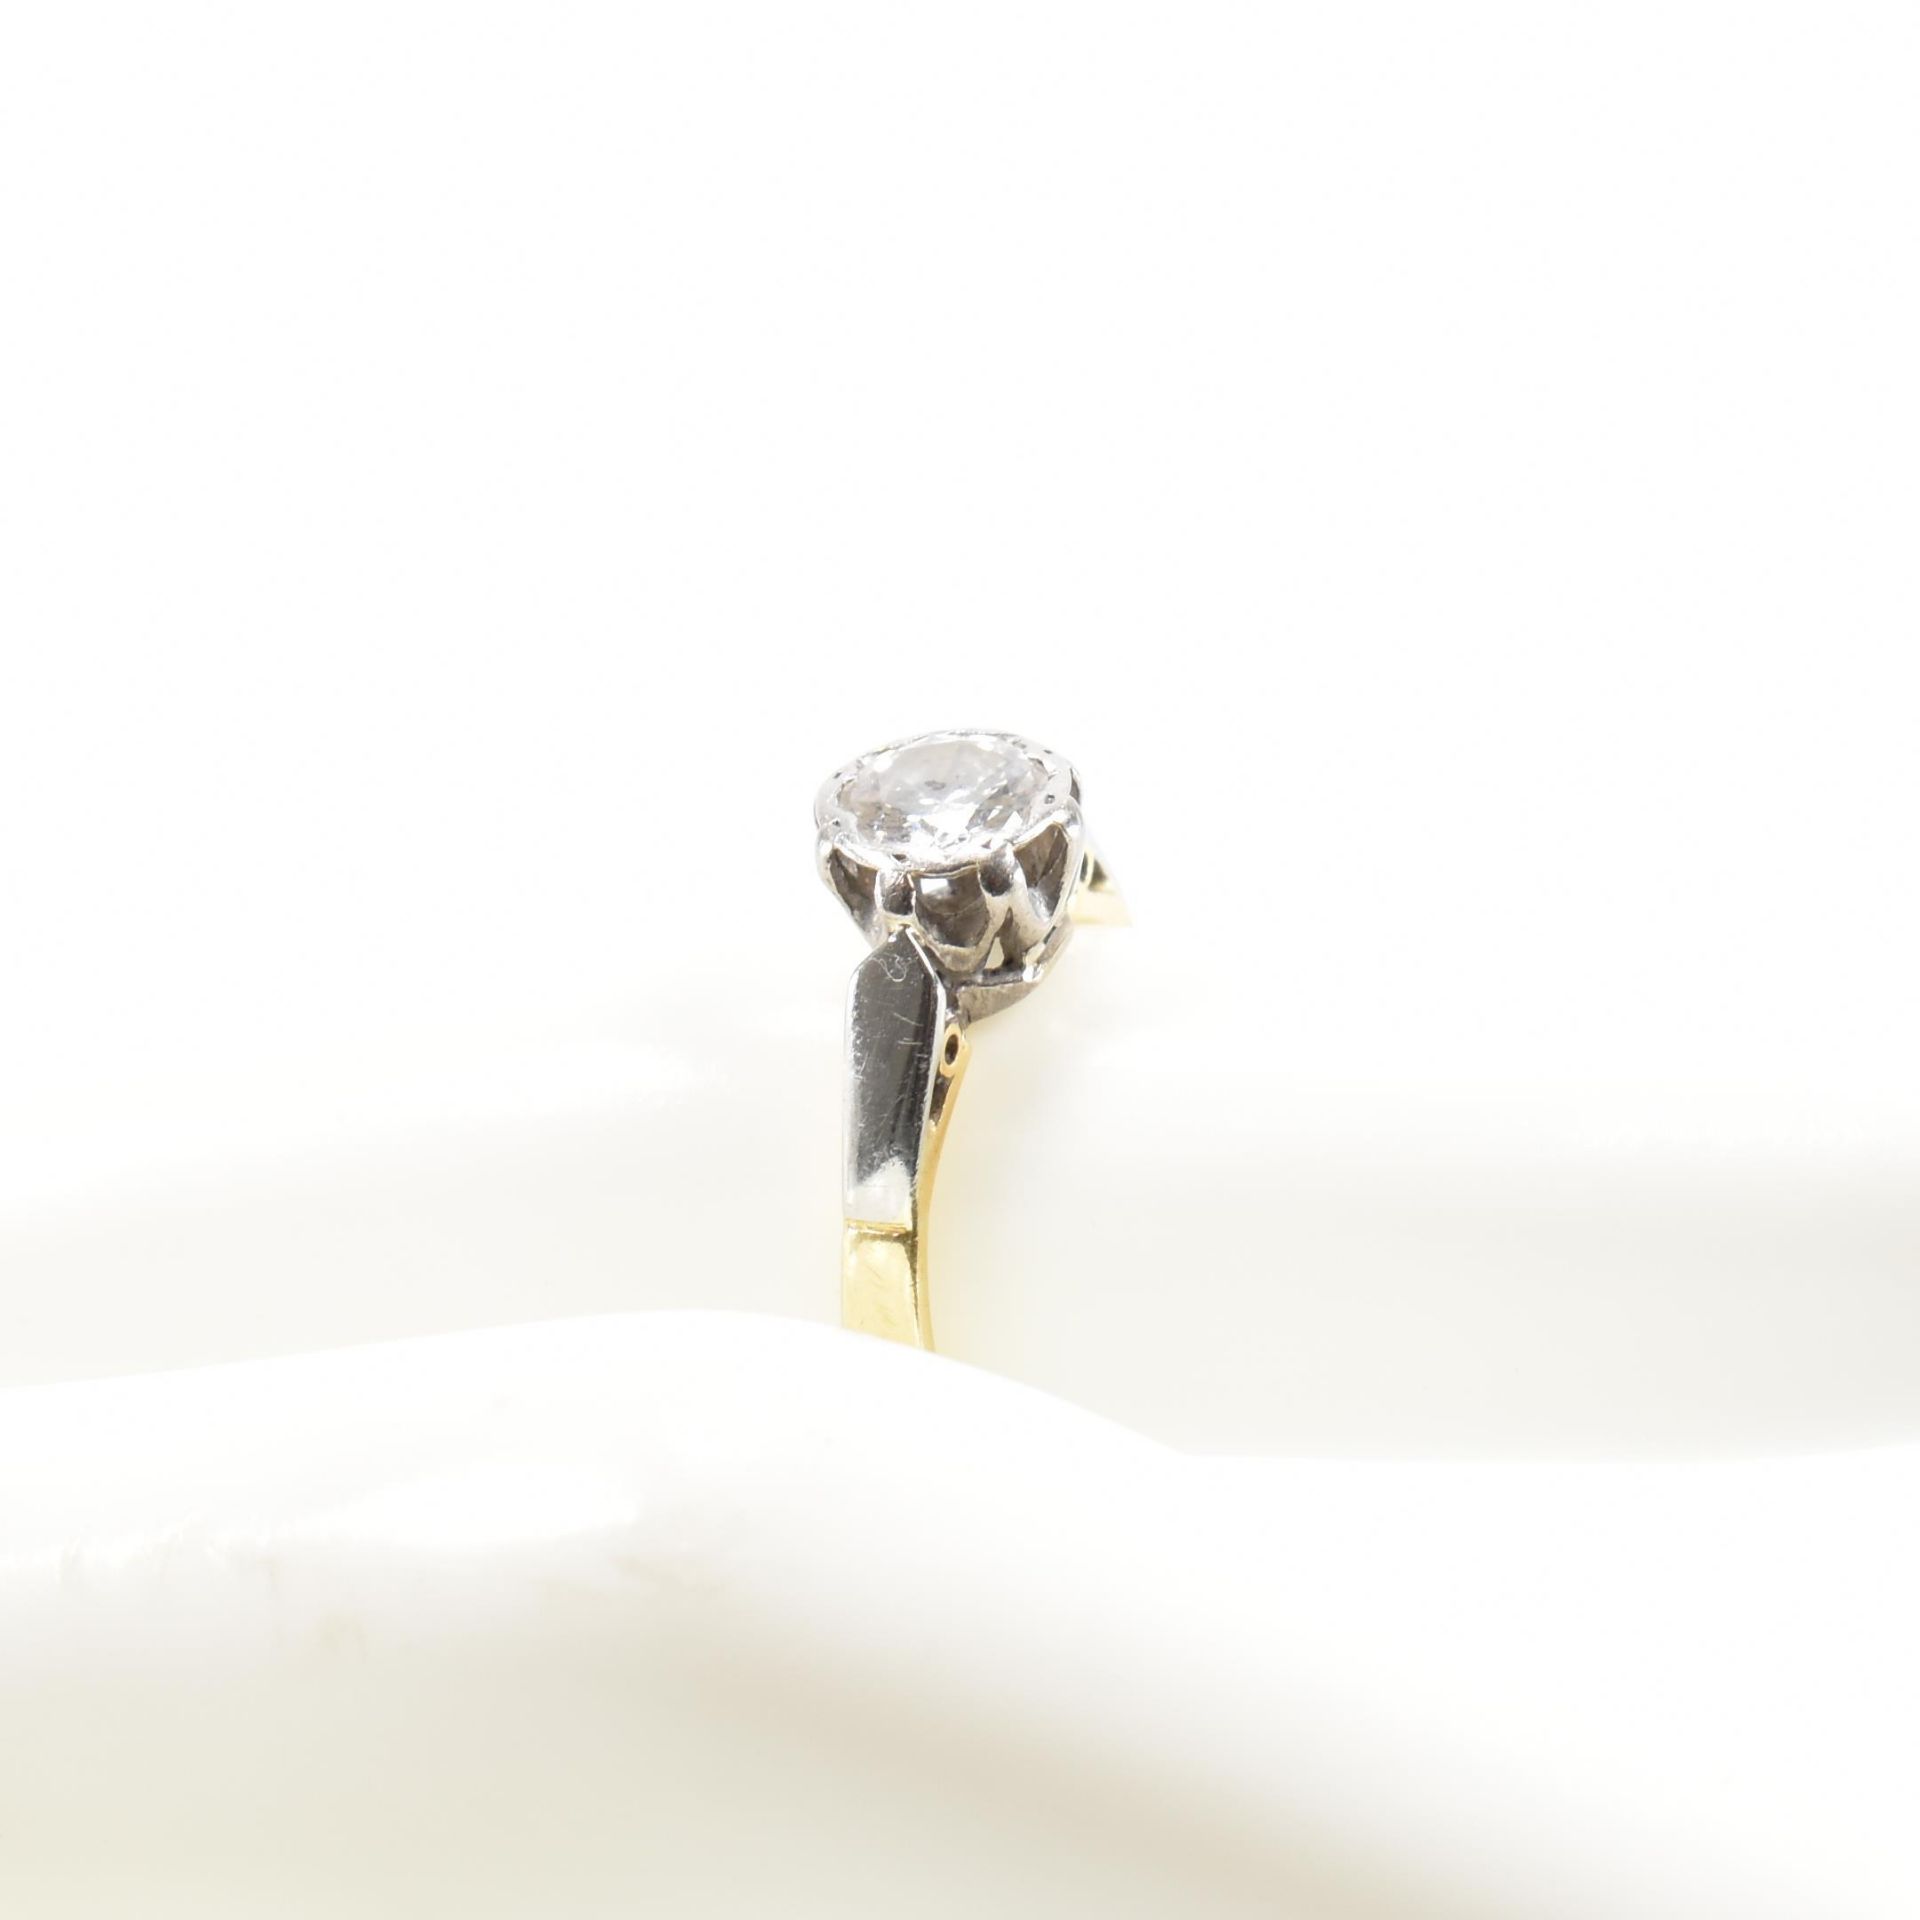 VINTAGE 18CT GOLD & DIAMOND SOLITAIRE RING - Image 8 of 8